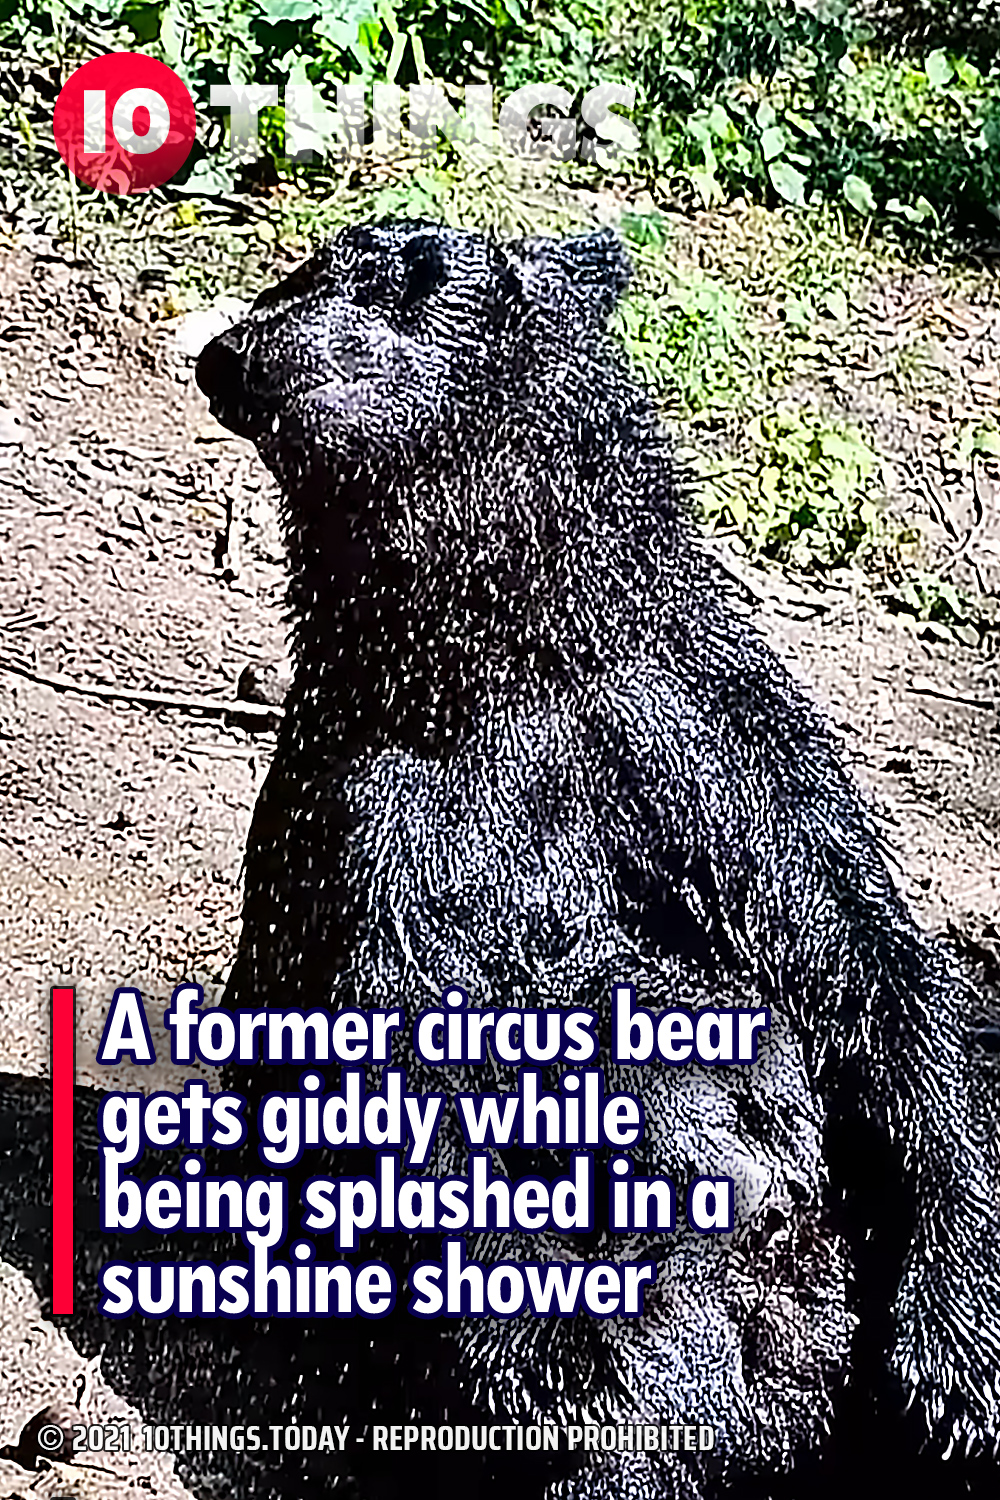 A former circus bear gets giddy while being splashed in a sunshine shower